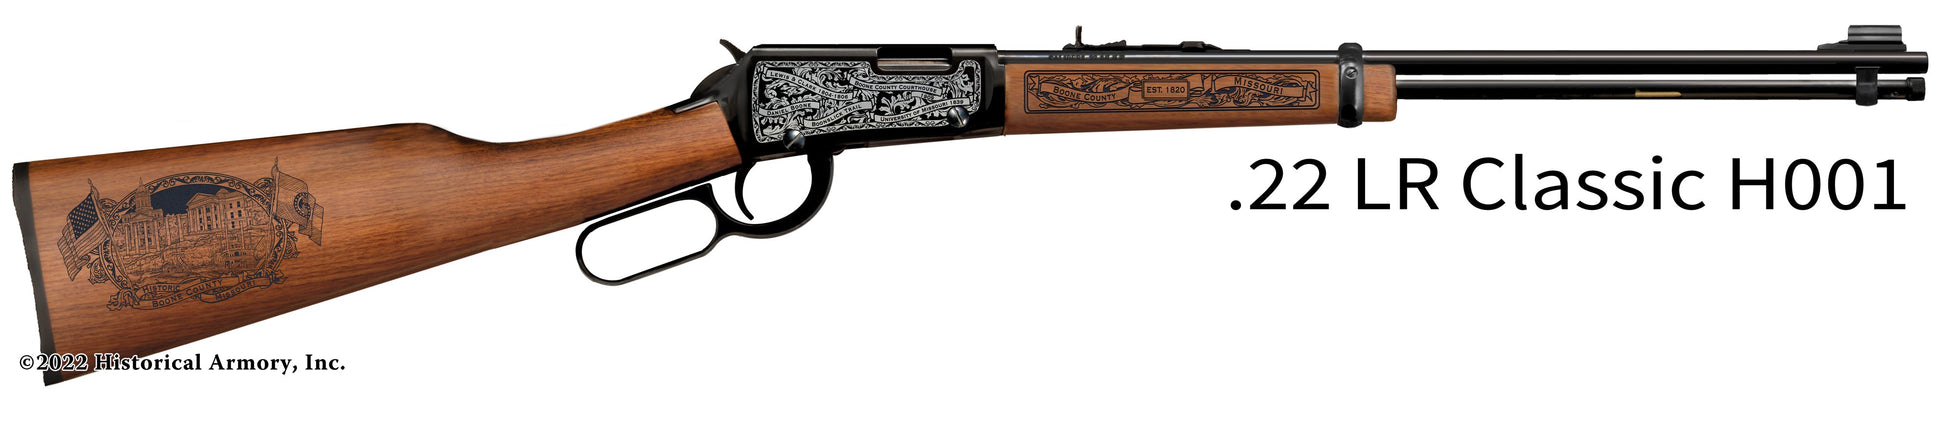 Boone County Missouri Engraved Henry H001 Rifle